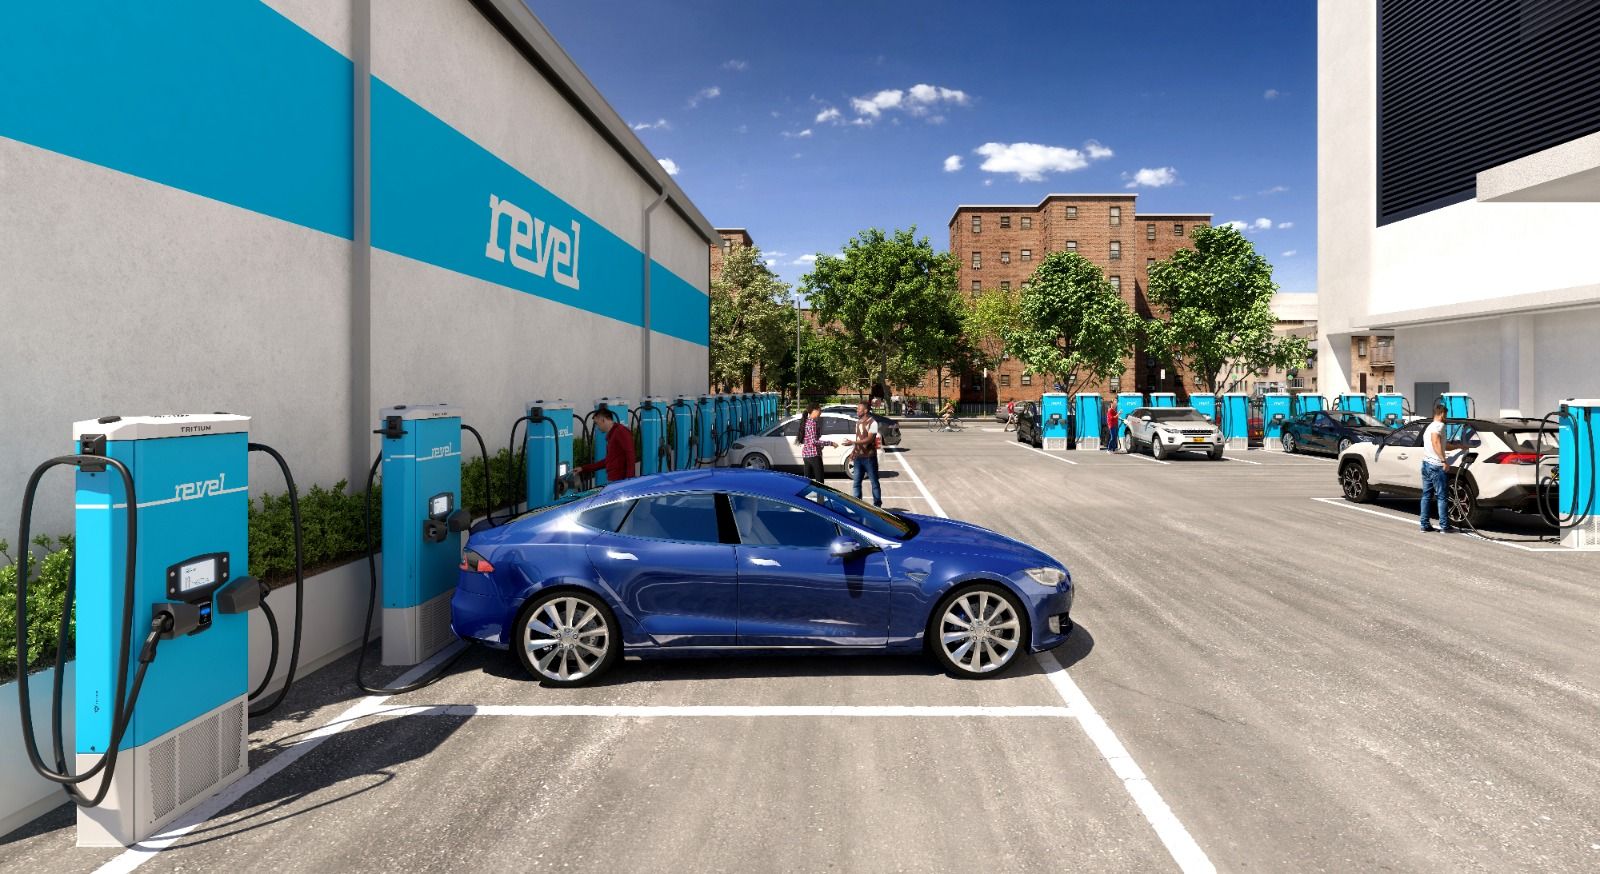 Revel expands NYC rideshare fleet with new EV, joining Tesla Model Y and 3